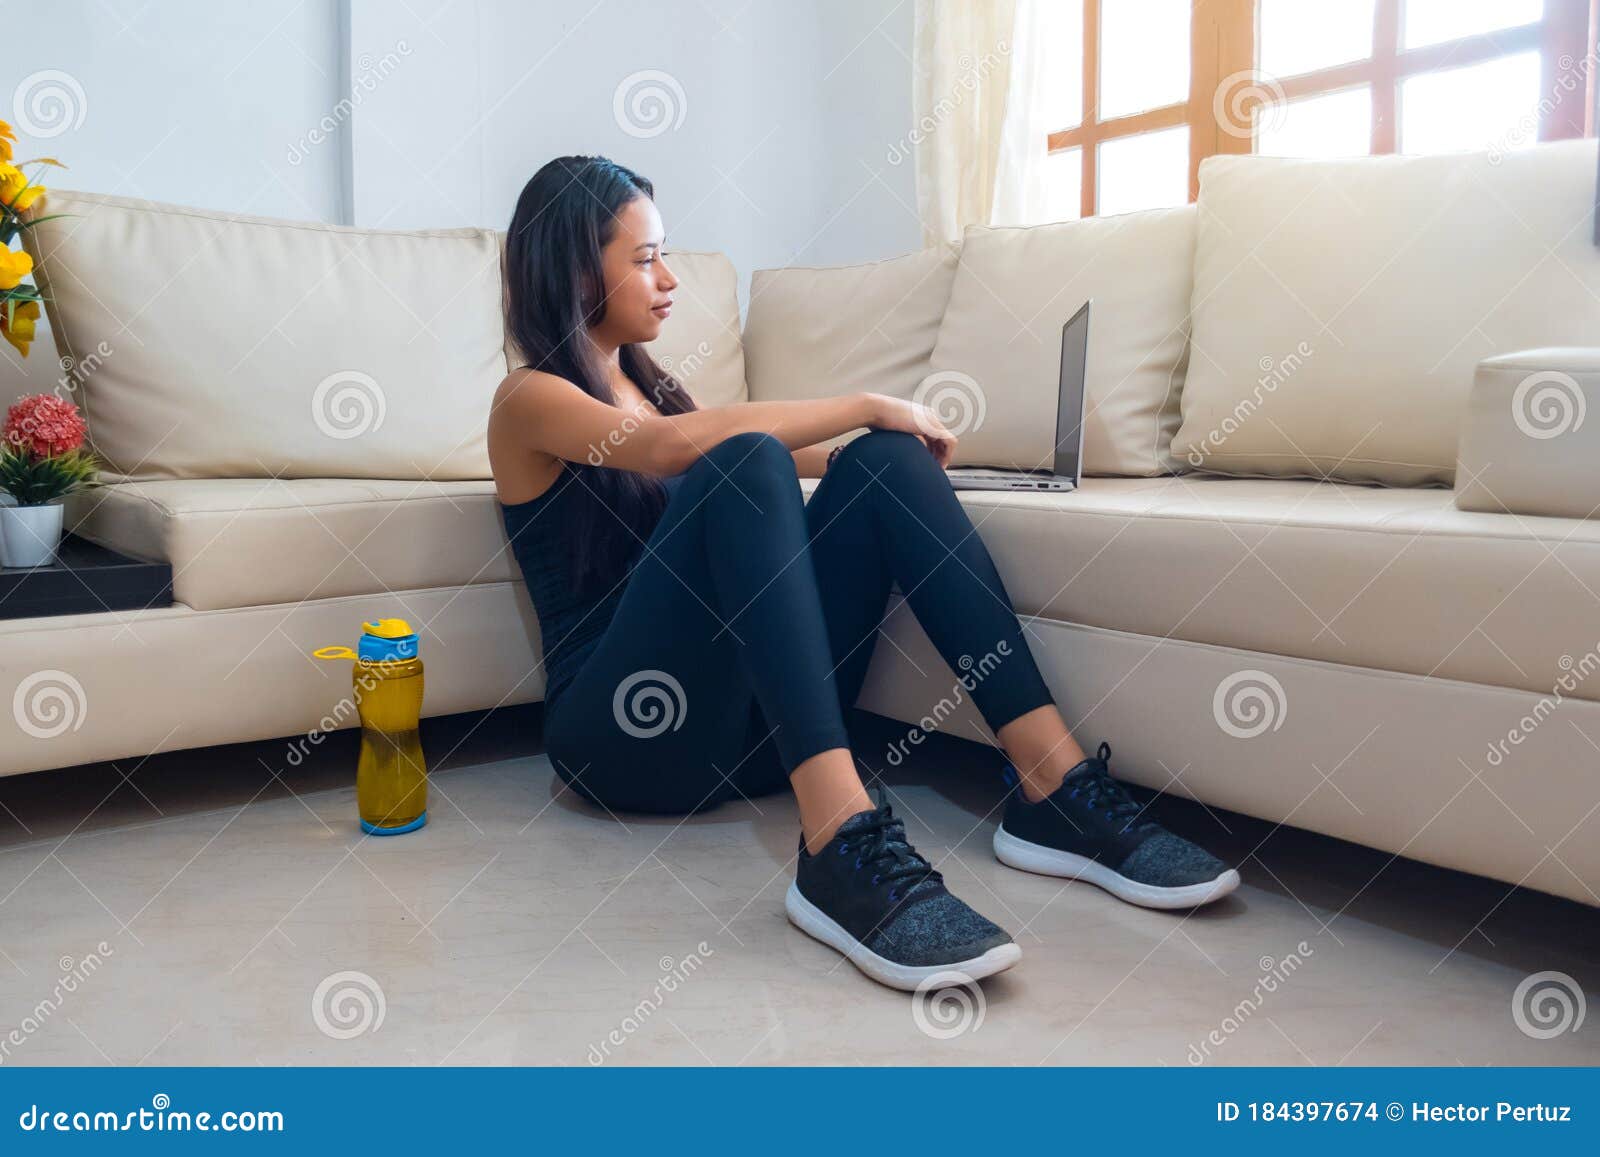 portrait of an attractive latina woman watching instructional videos on her laptop